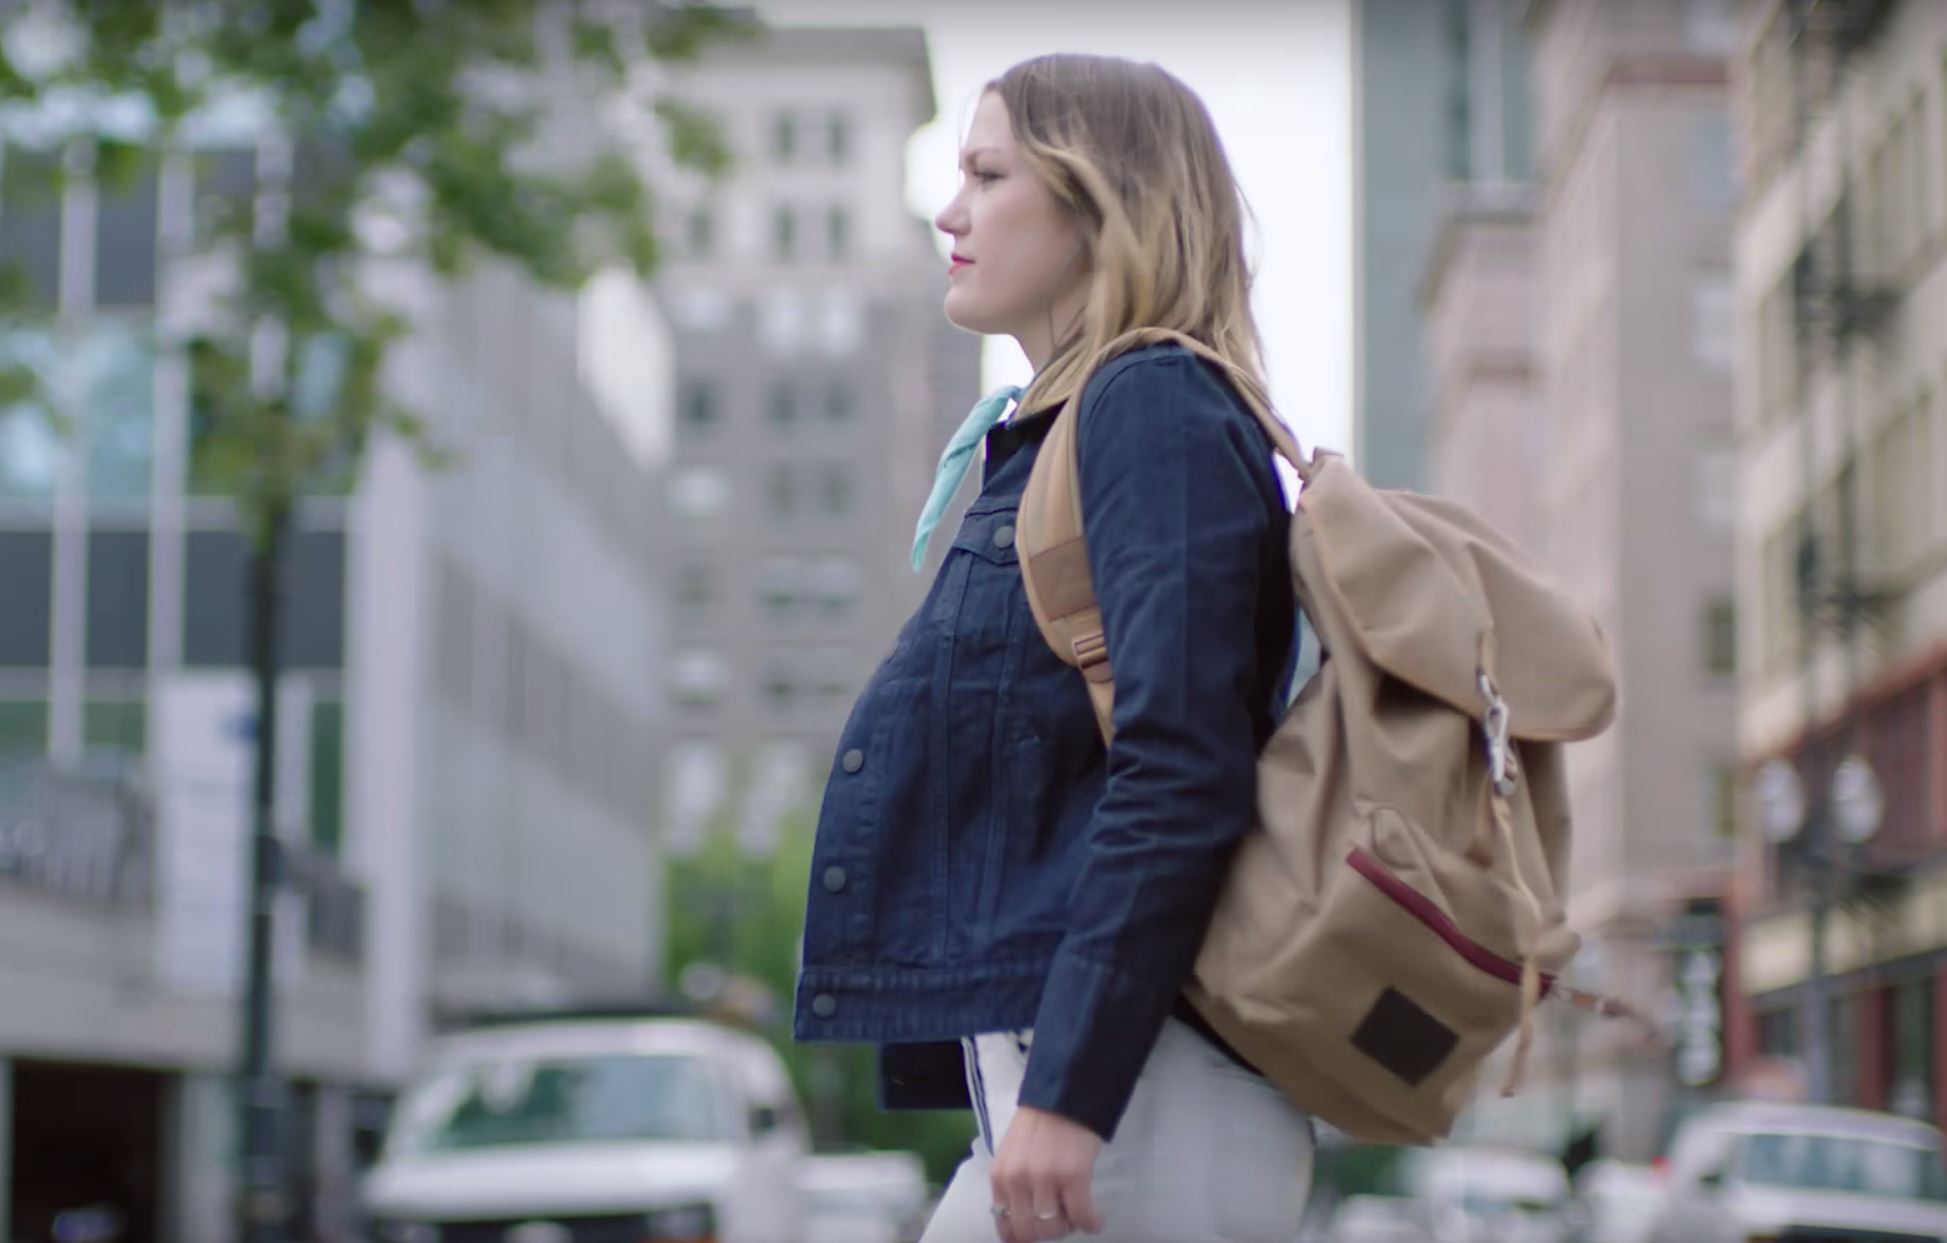 Levi's Commuter Trucker jacket combines tech and fashion